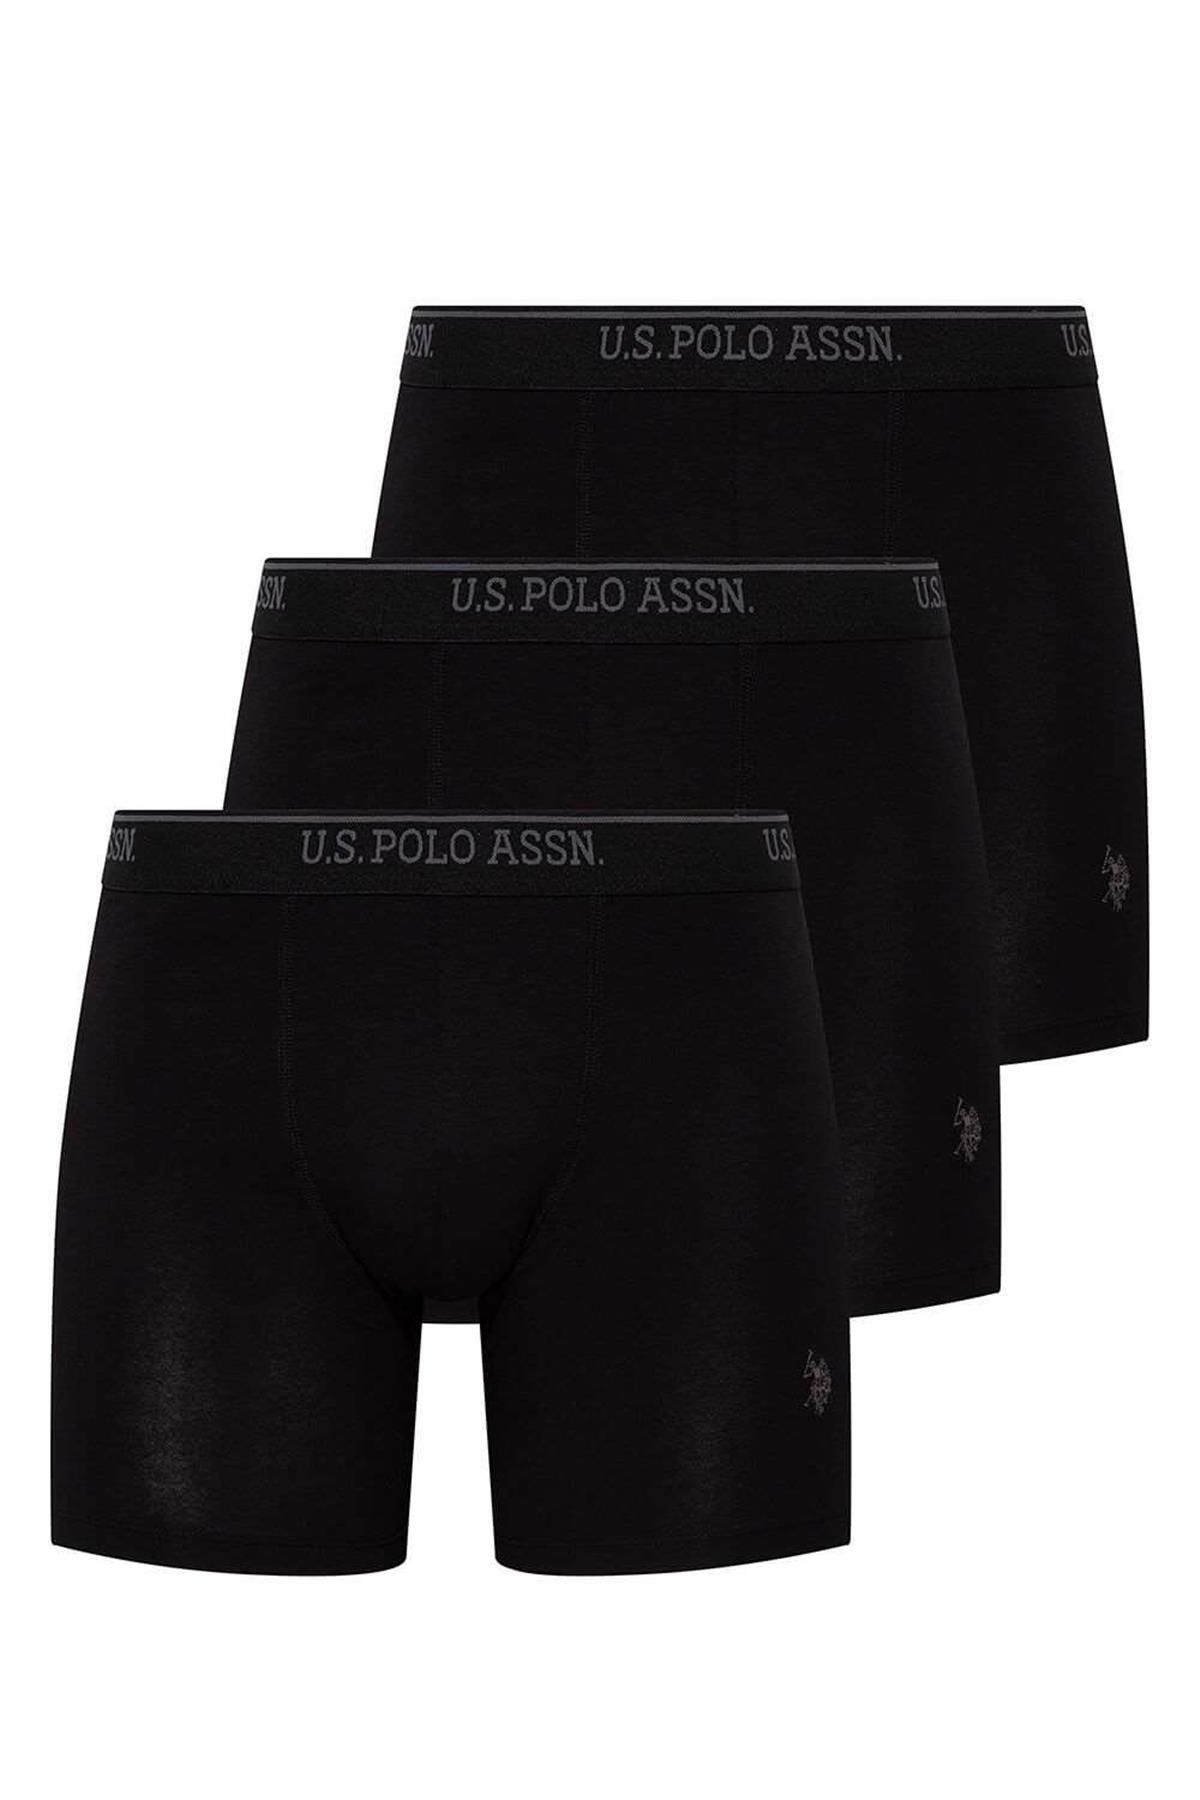 US Polo Assn, 3 Pack Boxer Shorts, Trunks